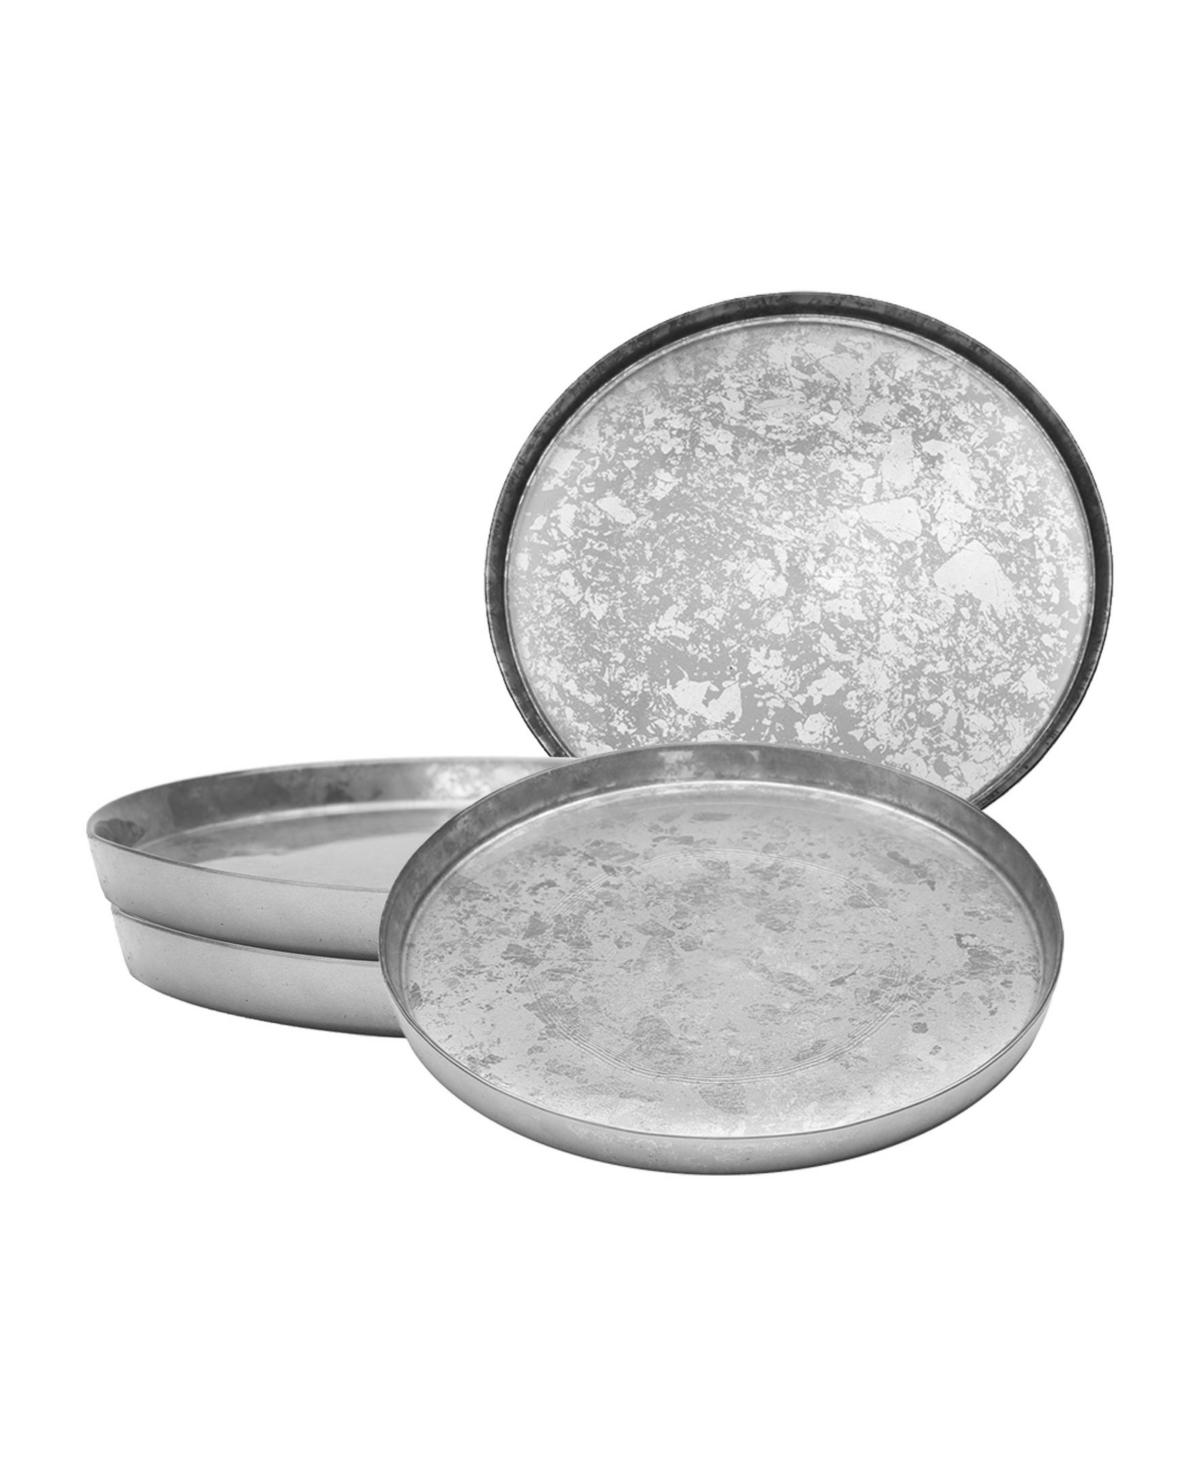 13" Silver Glitter Chargers with Raised Rim 4 Piece Set, Service for 4 - Silver